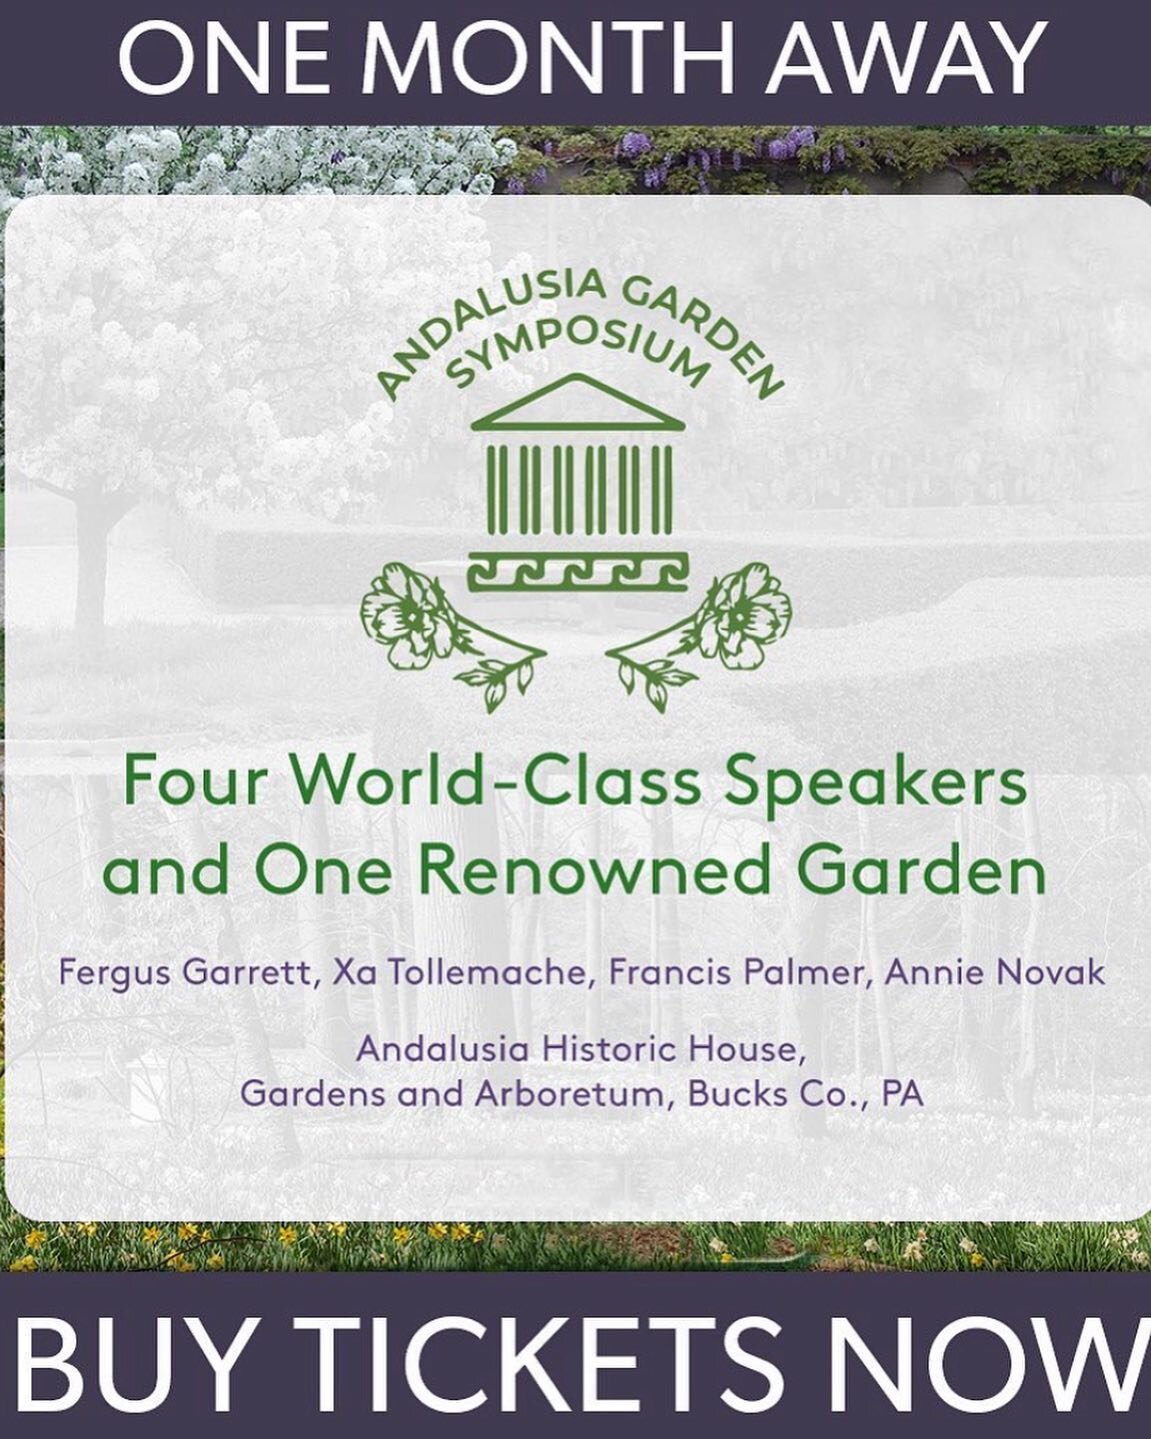 Don&rsquo;t miss the chance to visit @andalusiapa and hear lectures from world renowned horticulturists. It&rsquo;s only one month away and you can purchase tickets in the link of their IG page